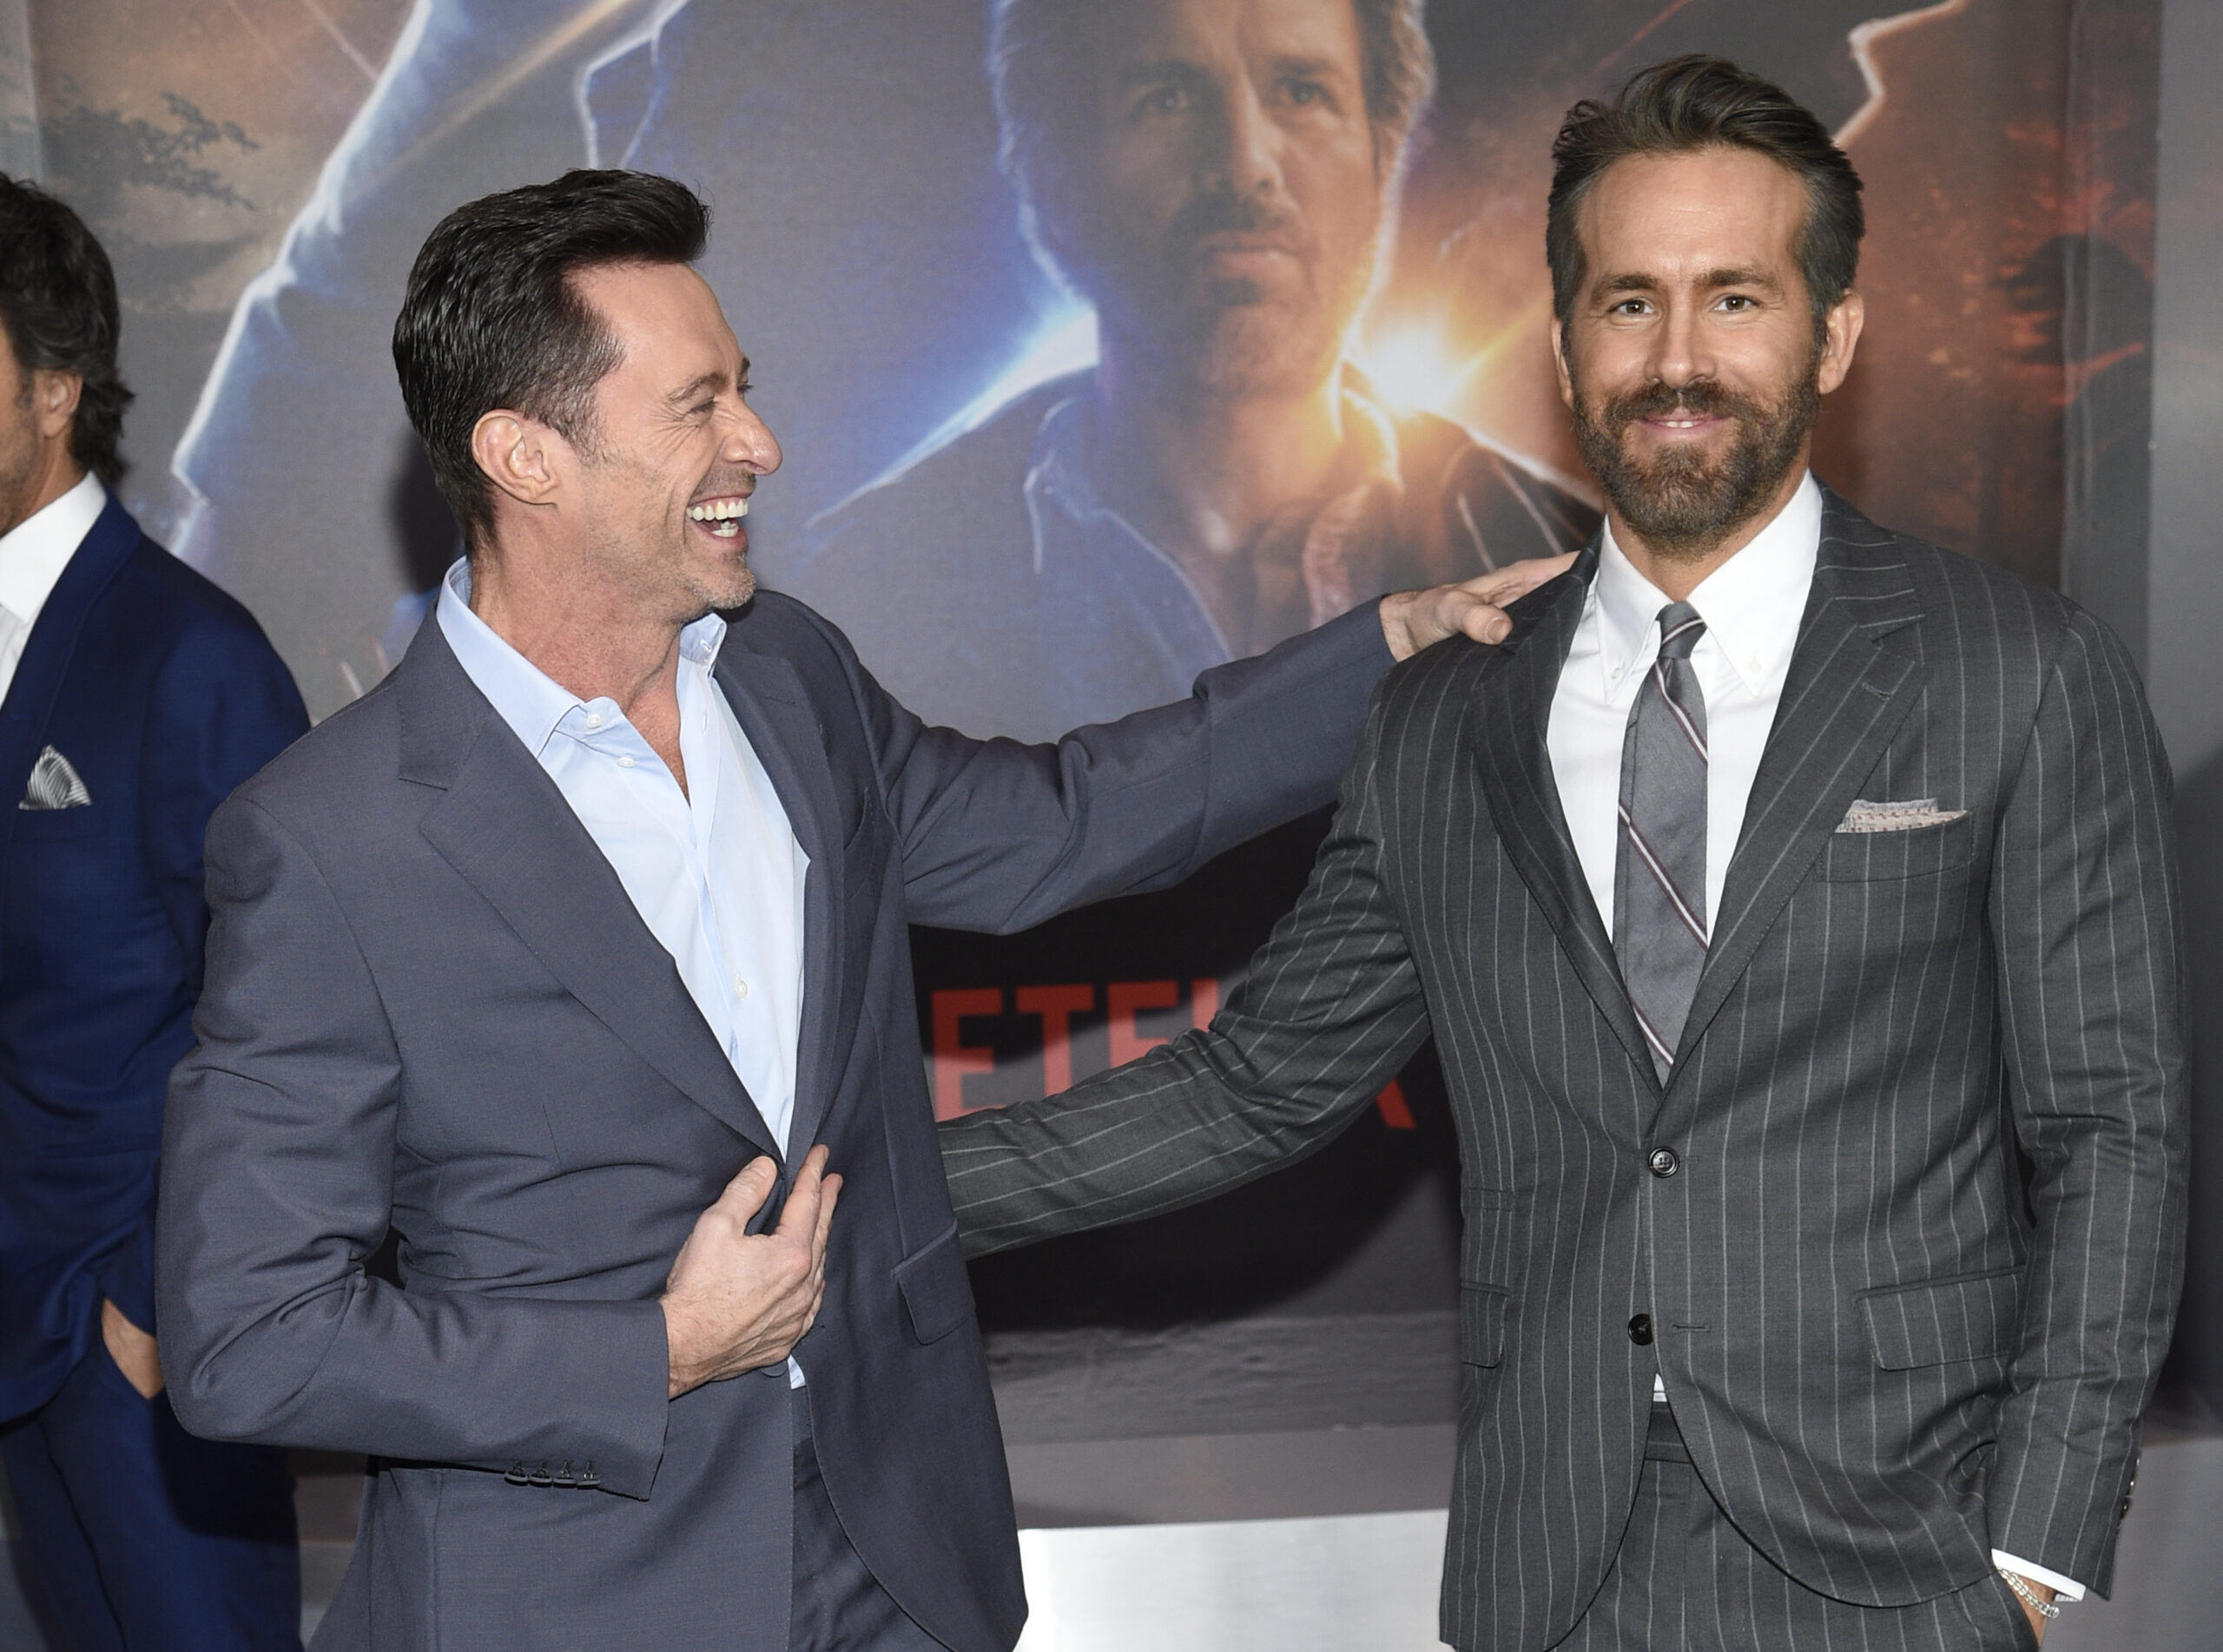 Actors Hugh Jackman, left, and Ryan Reynolds pose together at the world premiere of "The Adam Project" at Alice Tully Hall on Monday, Feb. 28, 2022, in New York. (Photo by Evan Agostini/Invision/AP)